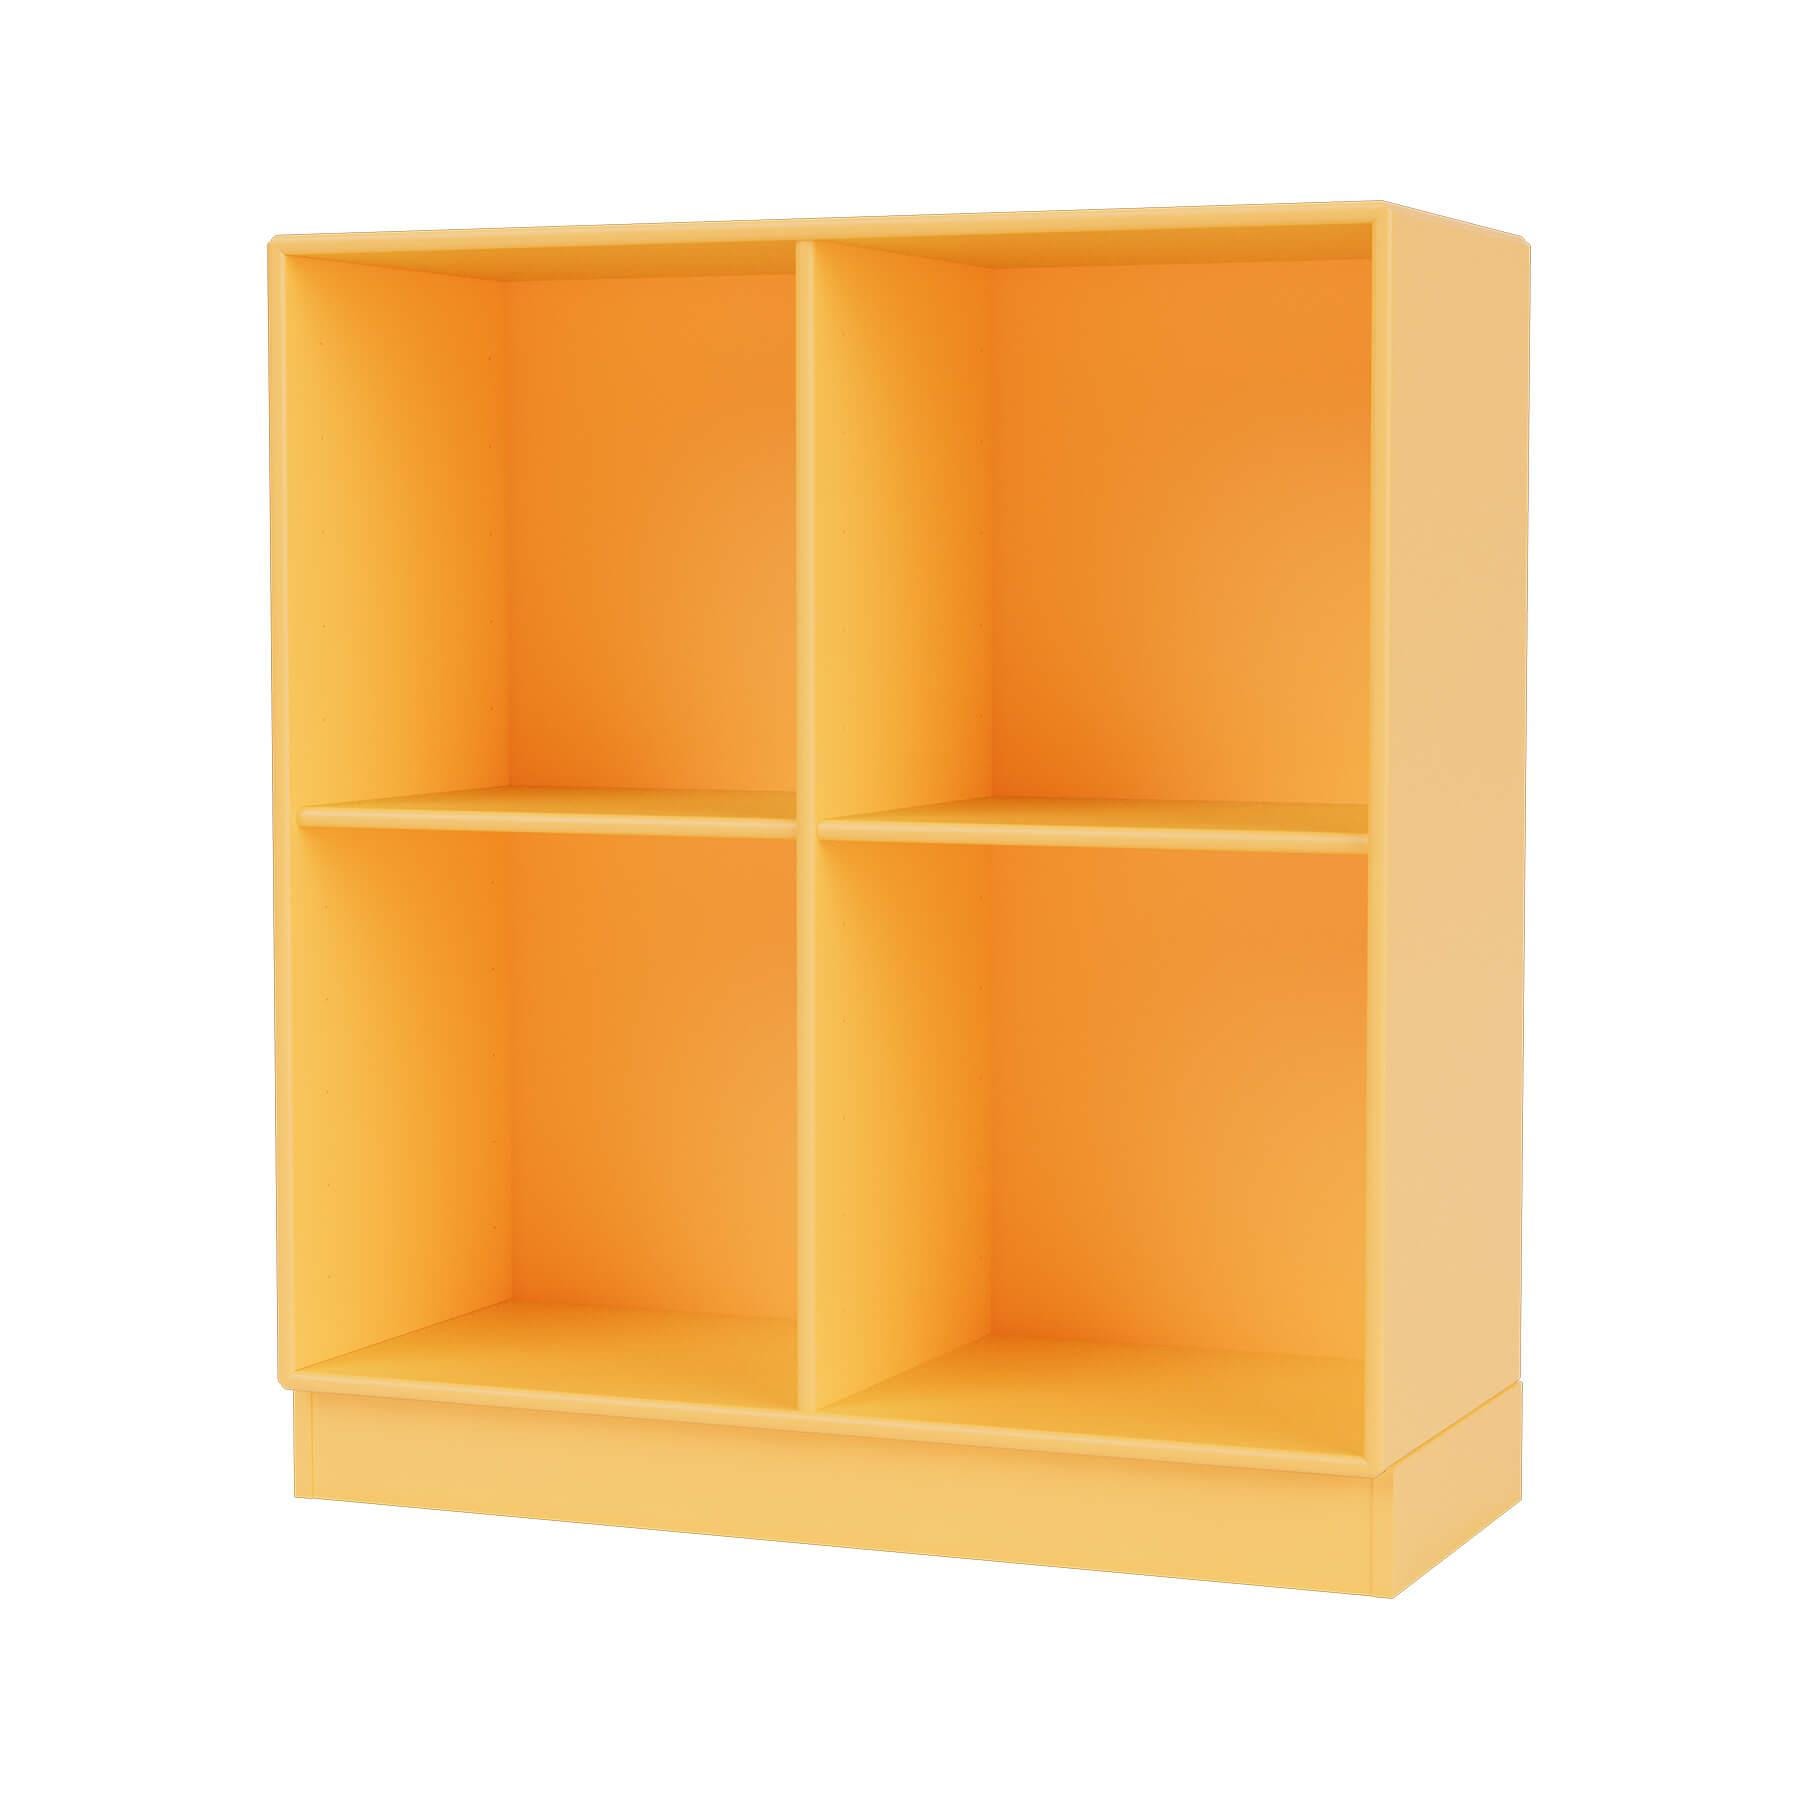 Montana Show Bookcase Acacia Plinth Yellow Designer Furniture From Holloways Of Ludlow